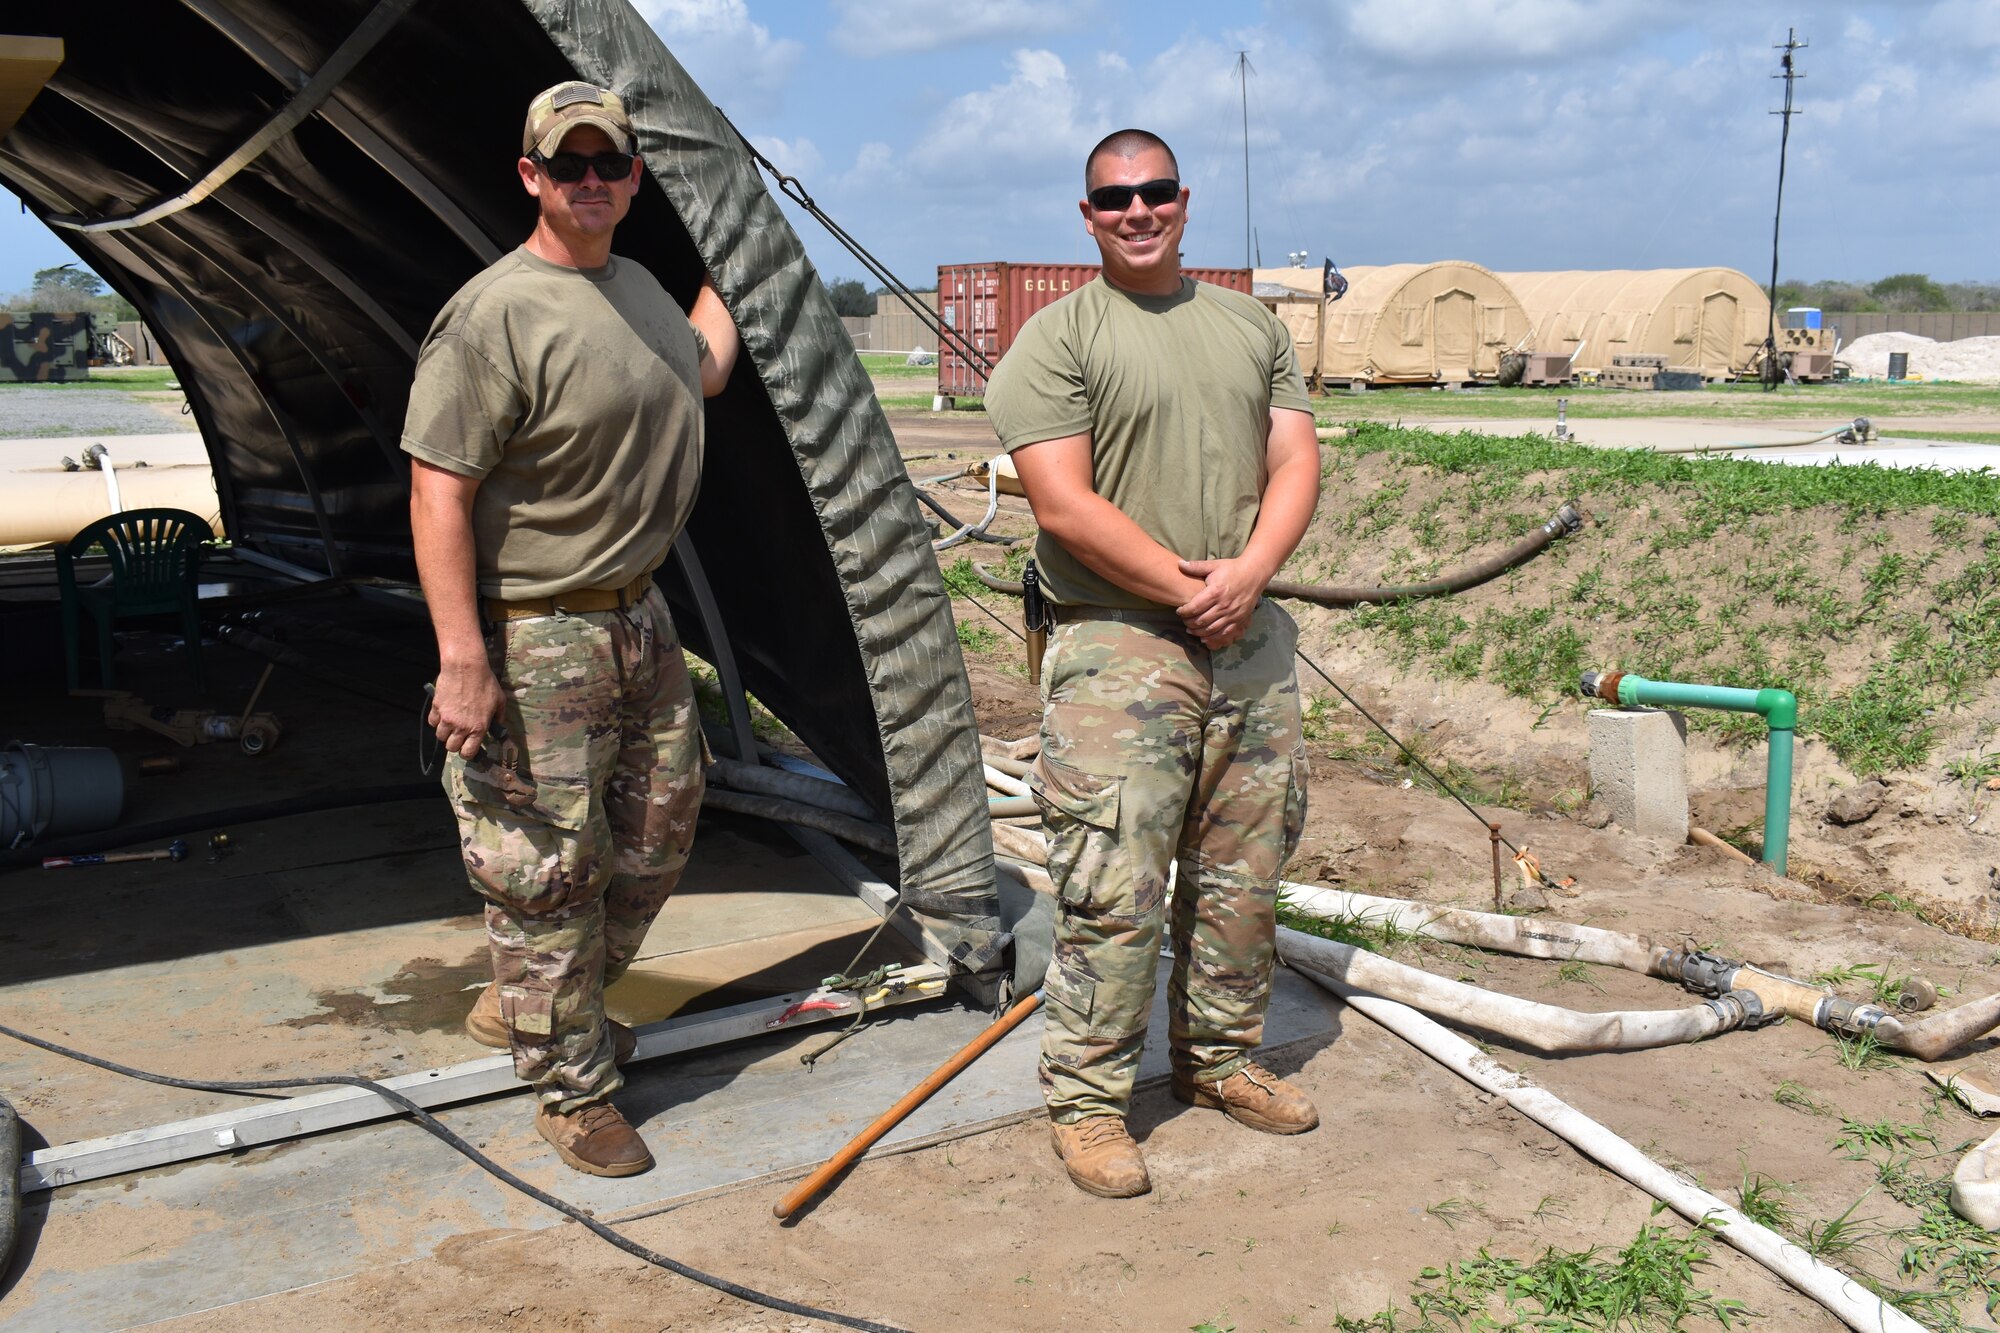 Tech. Sgts Jerl Dunn and Brendan Muchow, water and fuels system maintenance craftsmen for the 776th Expeditionary Air Base Squadron stand in front of their working area at Camp Simba at Manda Bay, May 19, 2021. Some of the responsibilities for Dunn and Muchow were to ensure that the waste and water systems at Camp Simba were in order and up to date alongside with the 475th Expeditionary Air Base Squadron civil engineers. (U.S. Air Force photo by Airman 1st Class Jan K. Valle)